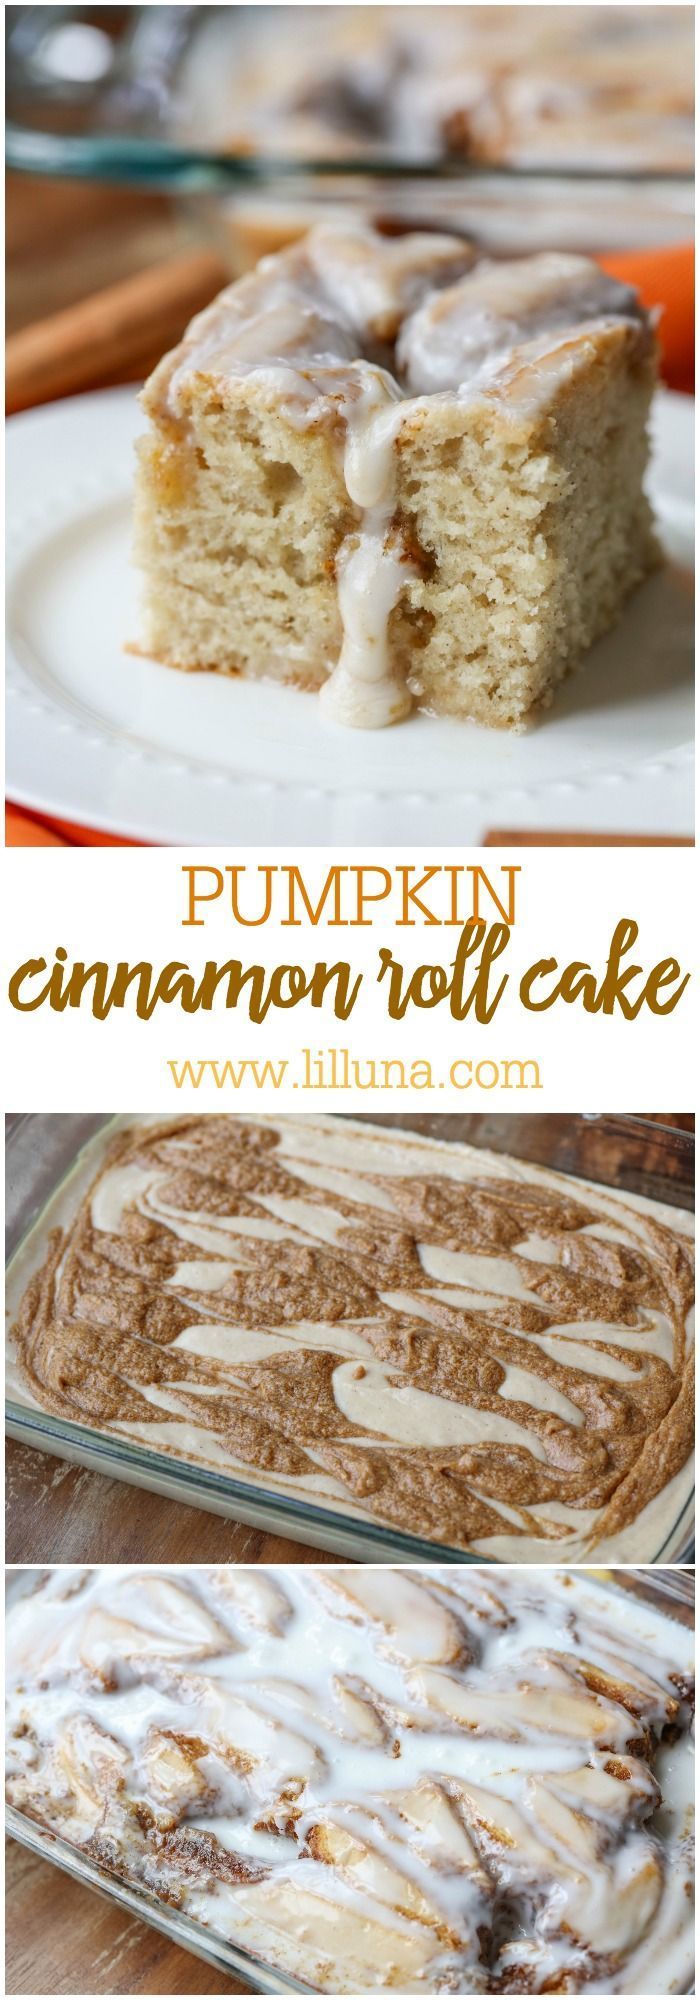 Pumpkin Cinnamon Roll Cake – a delicious, warm frosted cake with flavors of pumpkin, nutmeg and cinnamon! Its our new favorite